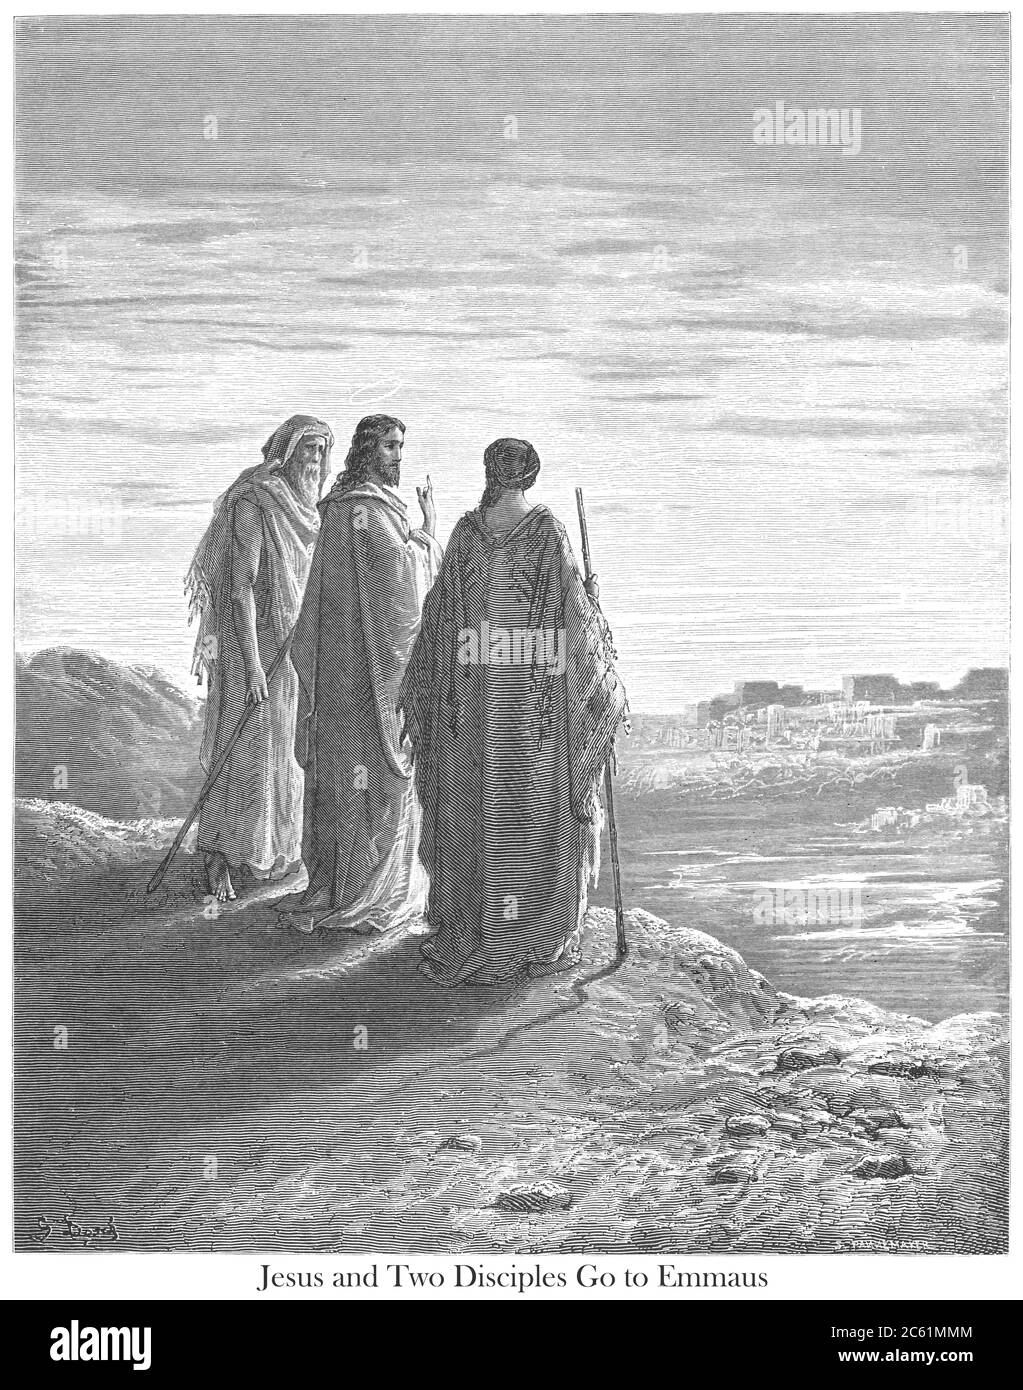 Jesus and the two Disciples Going to Emmaus [Luke 24:26-27] From the book 'Bible Gallery' Illustrated by Gustave Dore with Memoir of Dore and Descriptive Letter-press by Talbot W. Chambers D.D. Published by Cassell & Company Limited in London and simultaneously by Mame in Tours, France in 1866 Stock Photo